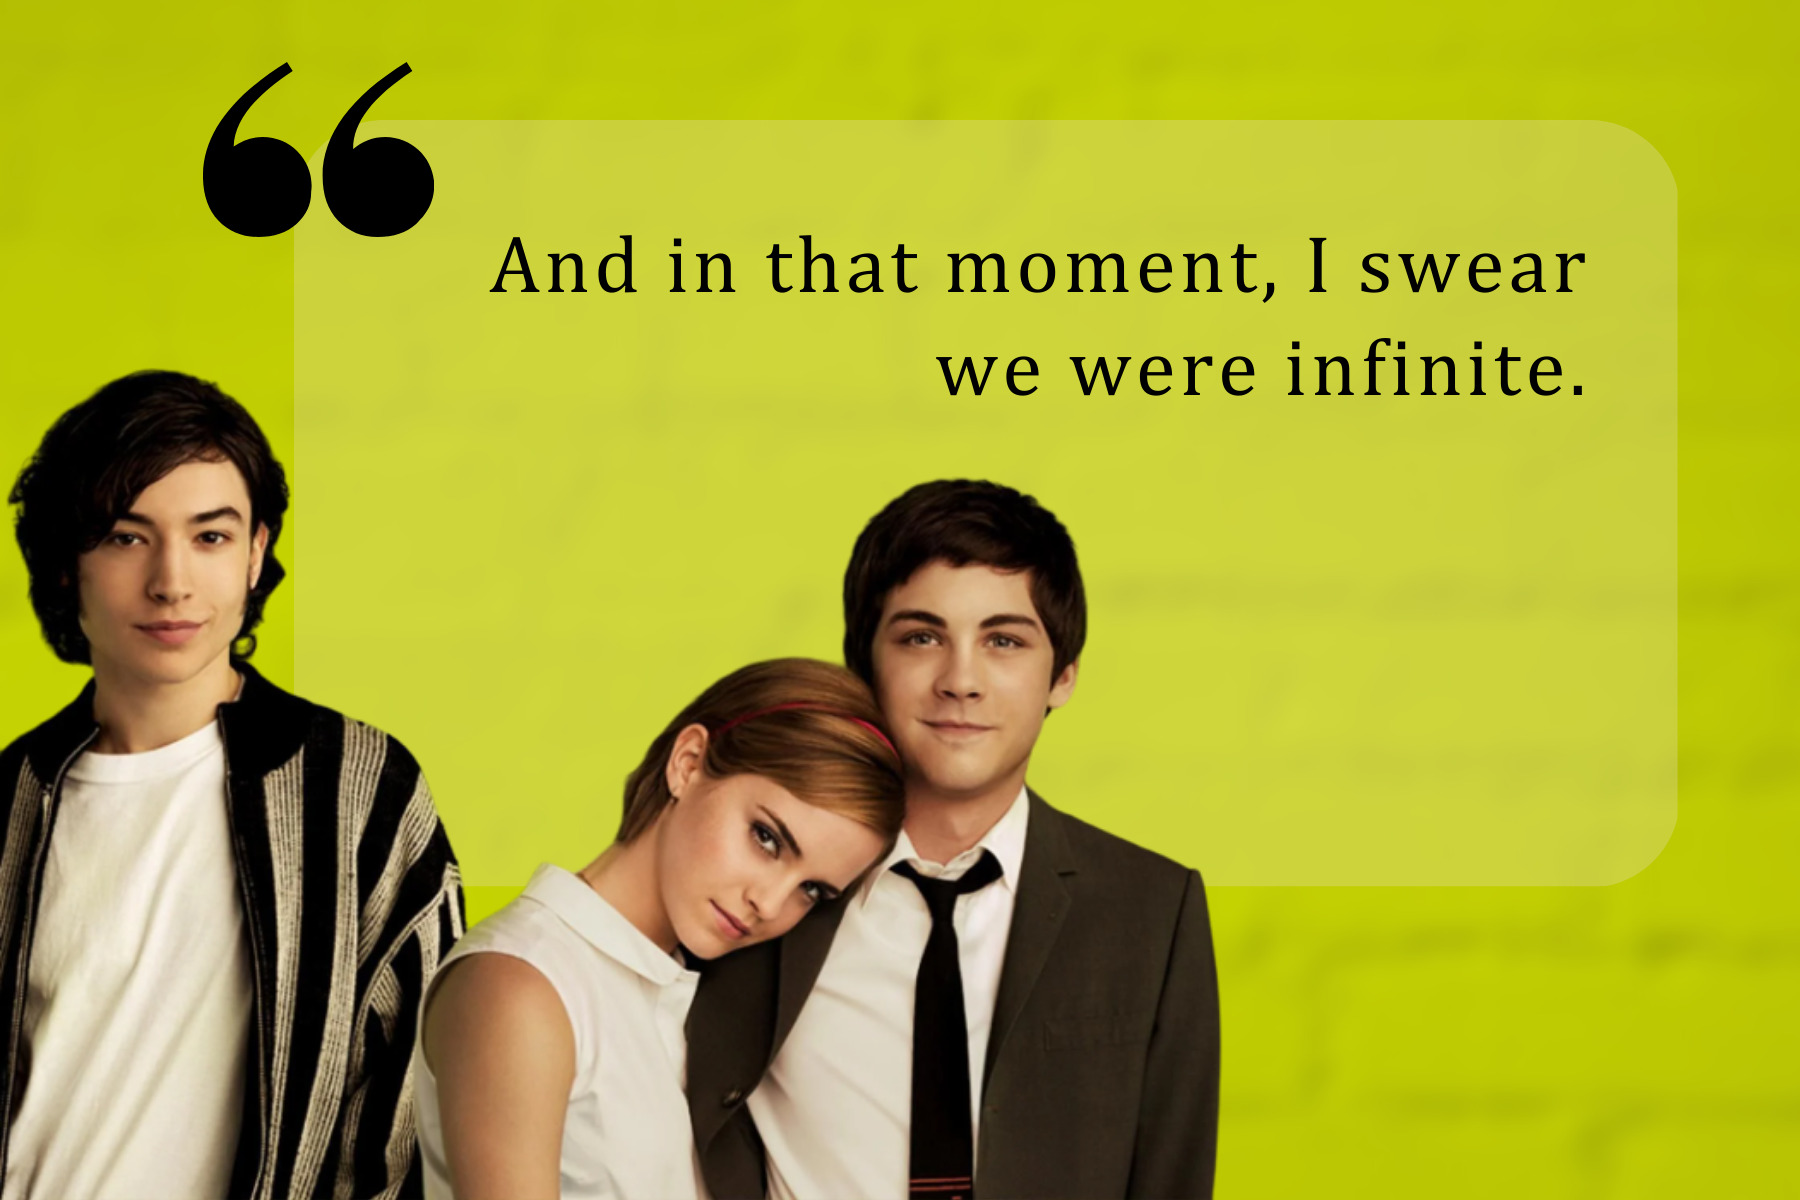 25 “Perks Of Being A Wallflower” Quotes To Remind You Of Your Teenage Years